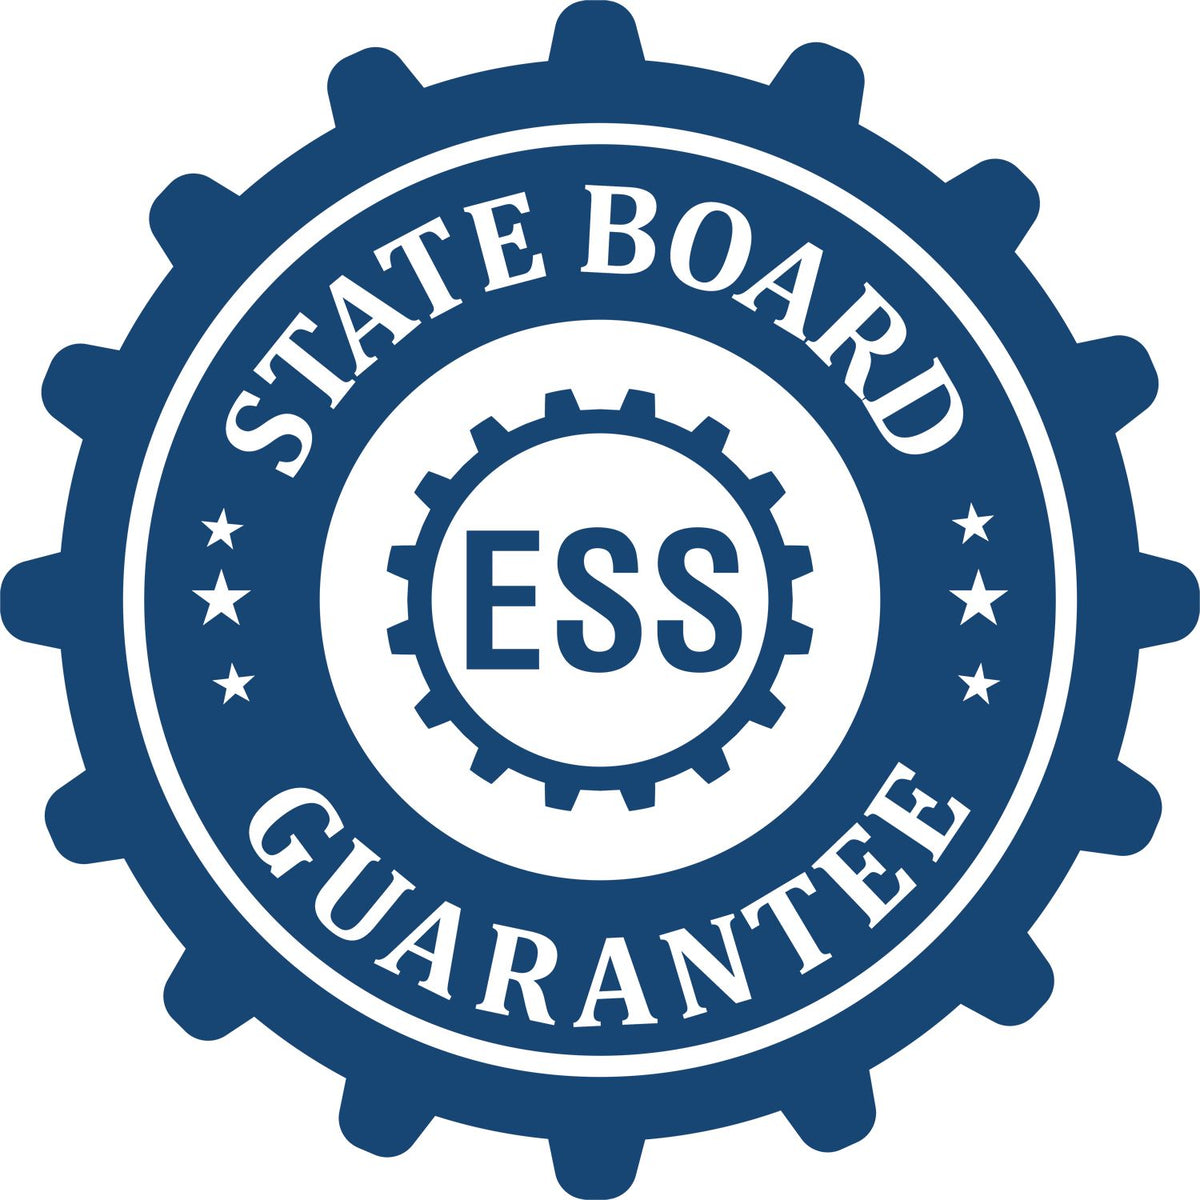 An emblem in a gear shape illustrating a state board guarantee for the New Mexico Geologist Desk Seal